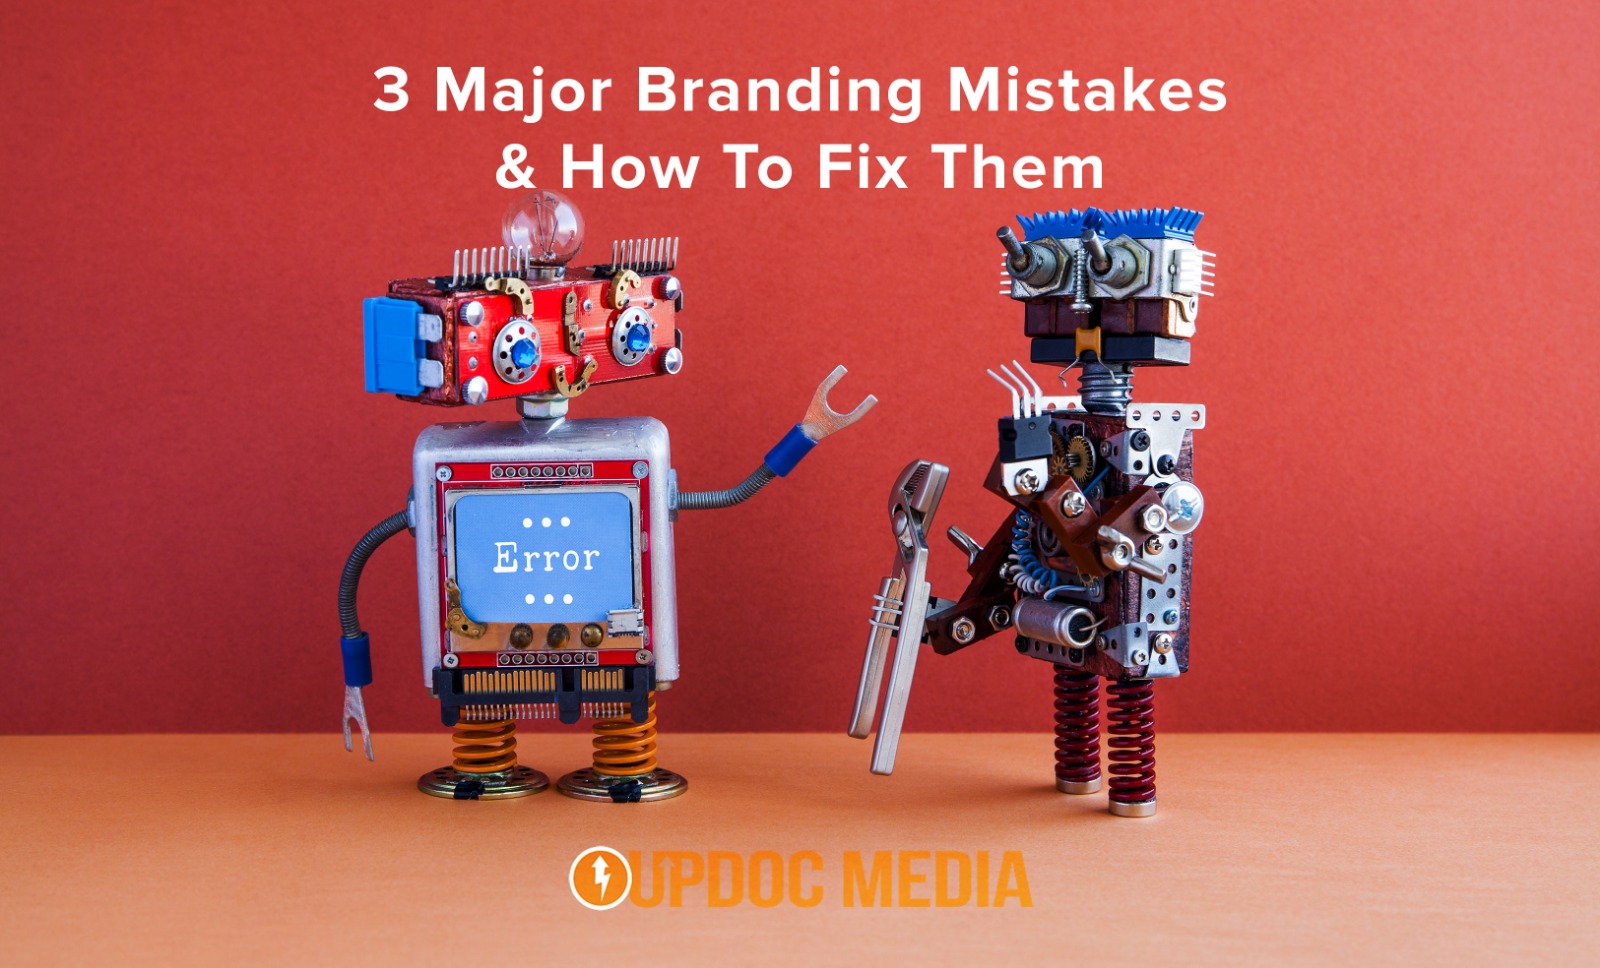 3 Major Branding Mistakes and How To Fix Them - UpDoc Media